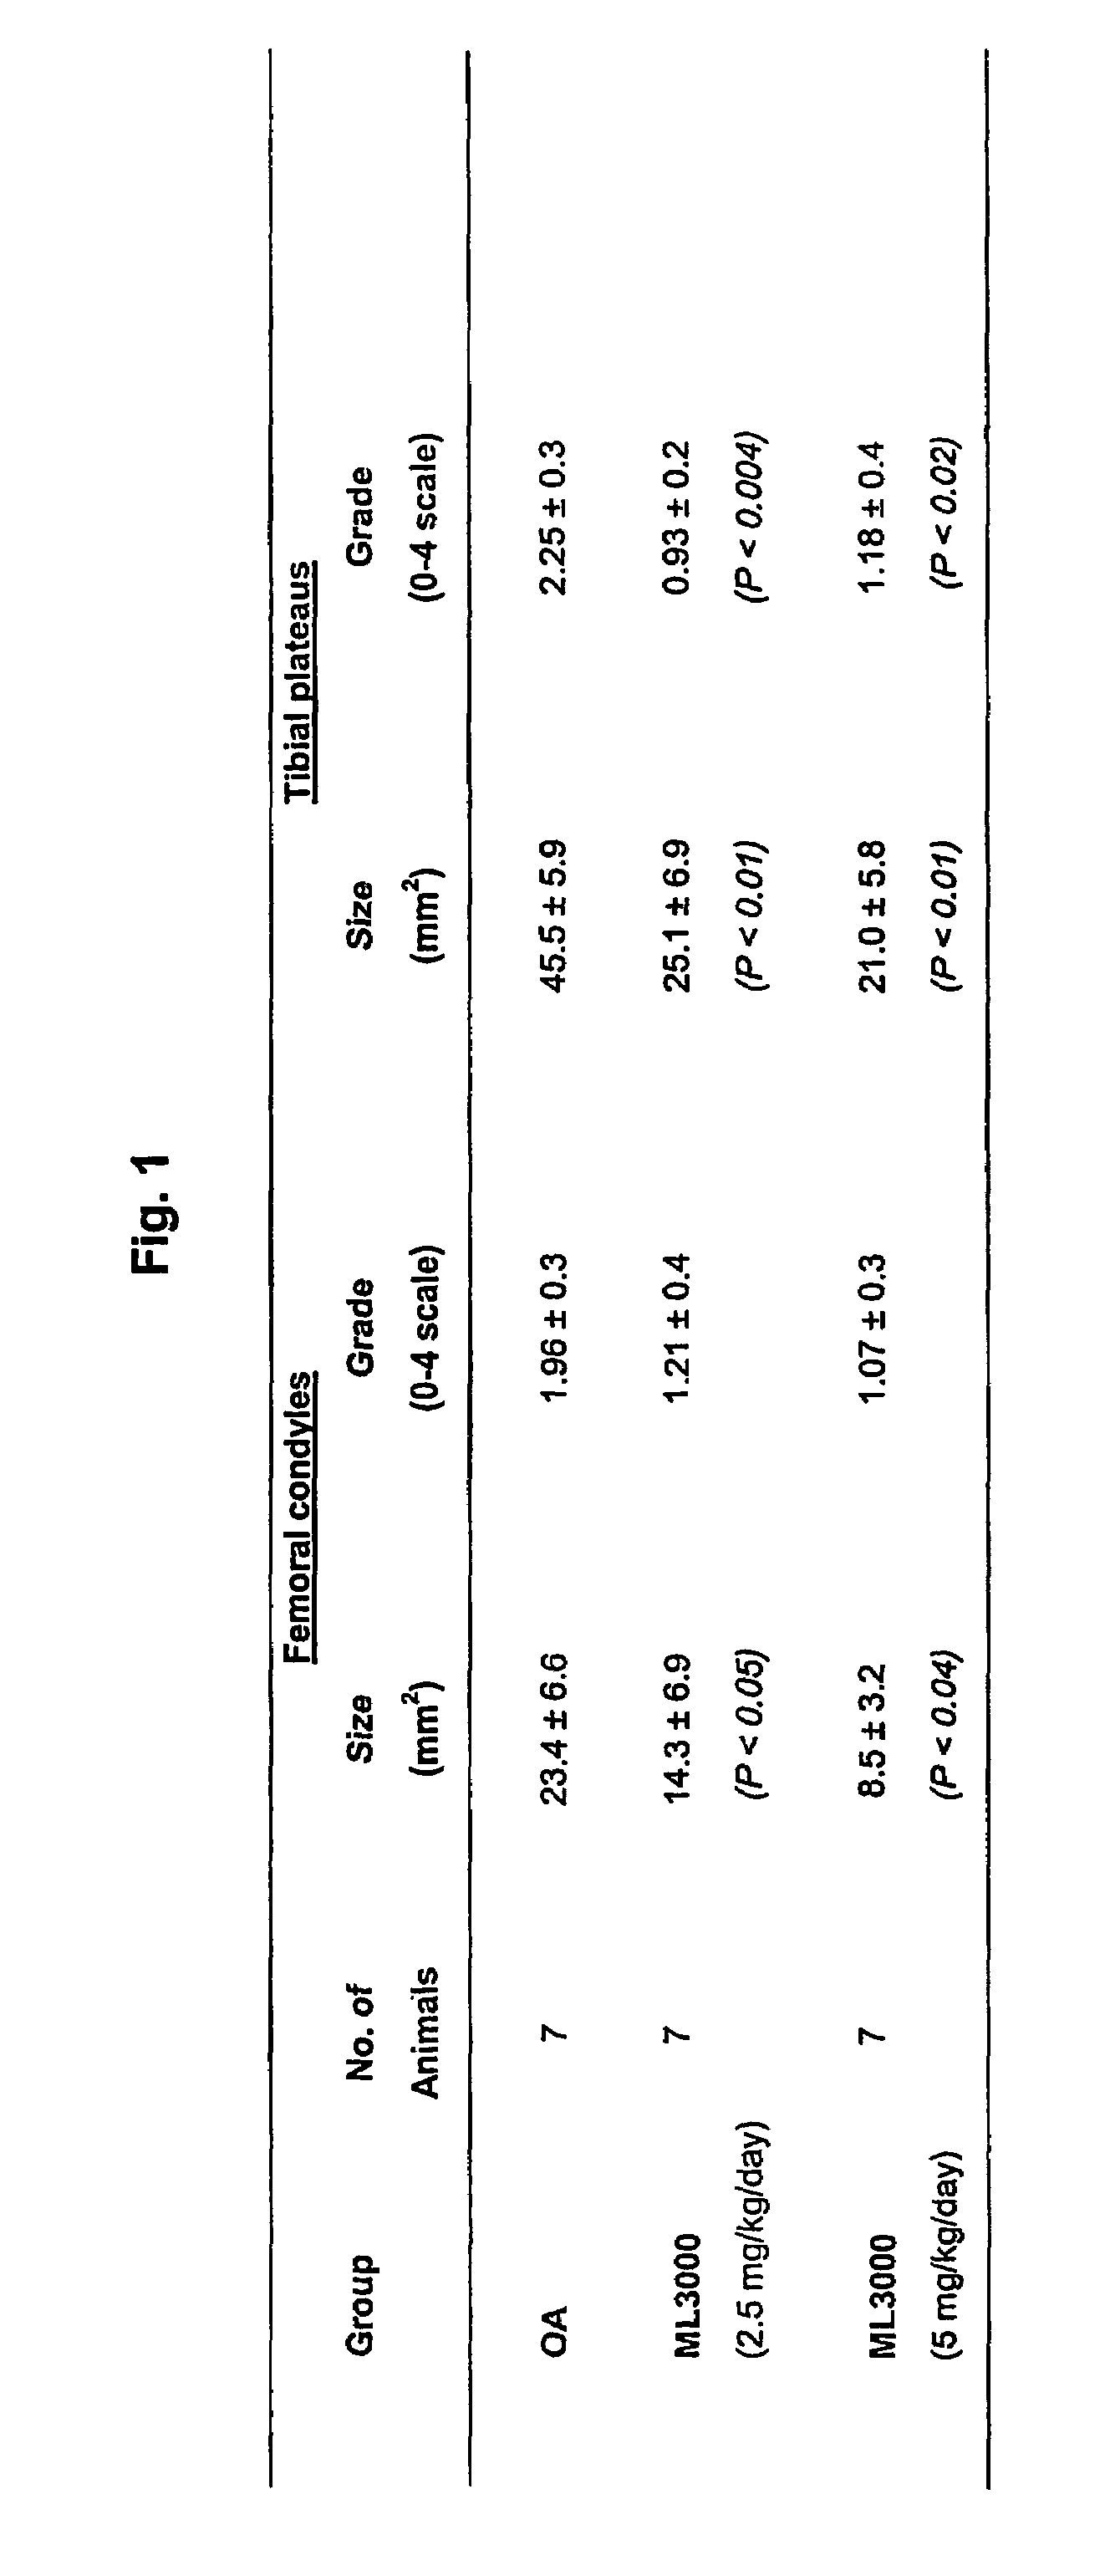 Use of annellated pyrrole compounds in the treatment of articular cartilage or subchondral bone degeneration